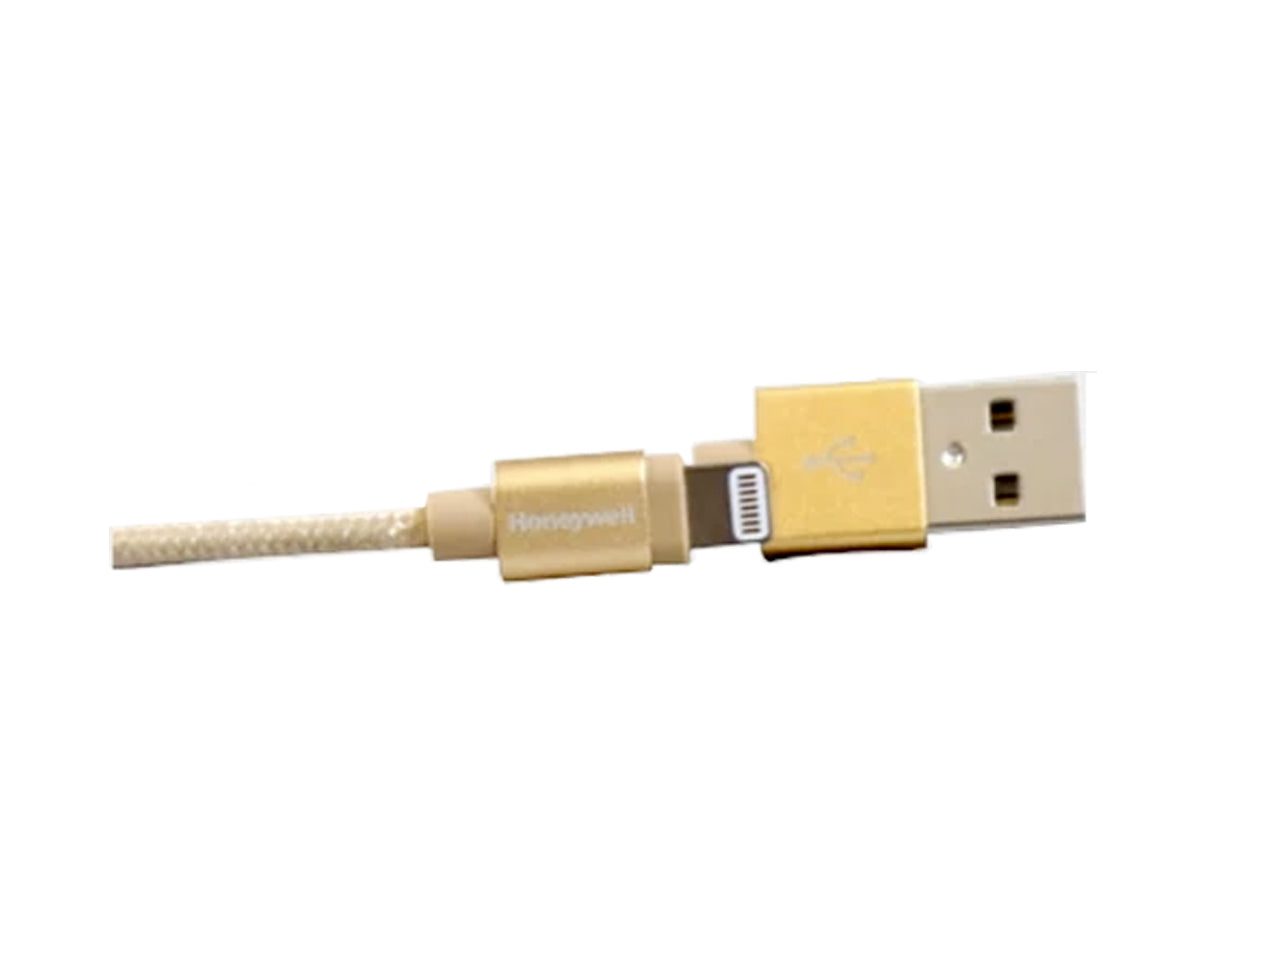 Honeywell Apple Lightning Sync & Charge Cable 1.2 Mtr (Braided) Gold